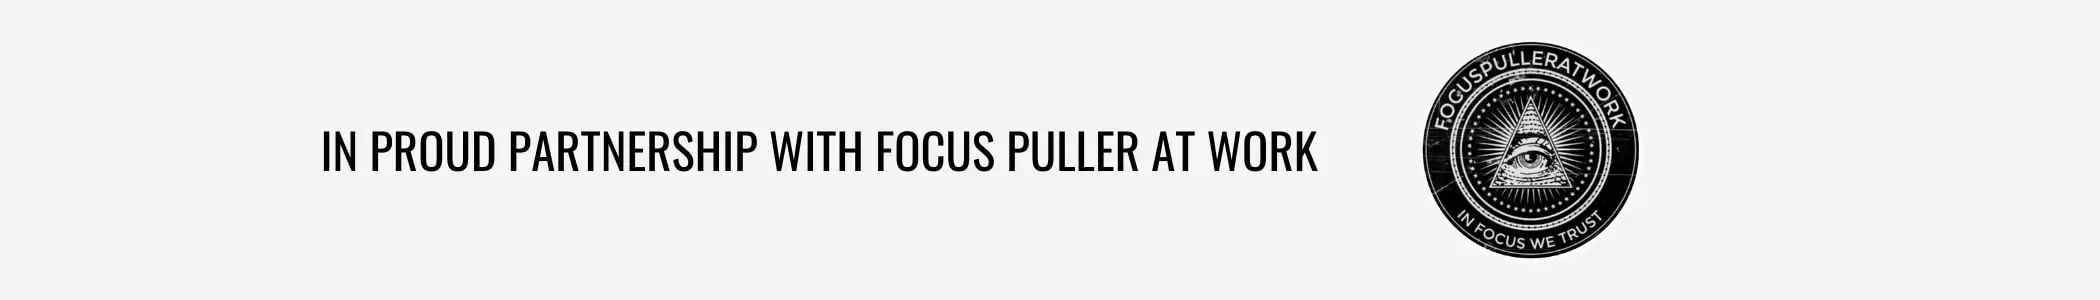 Focus Pullers At Work Banner 2100x300 (4)